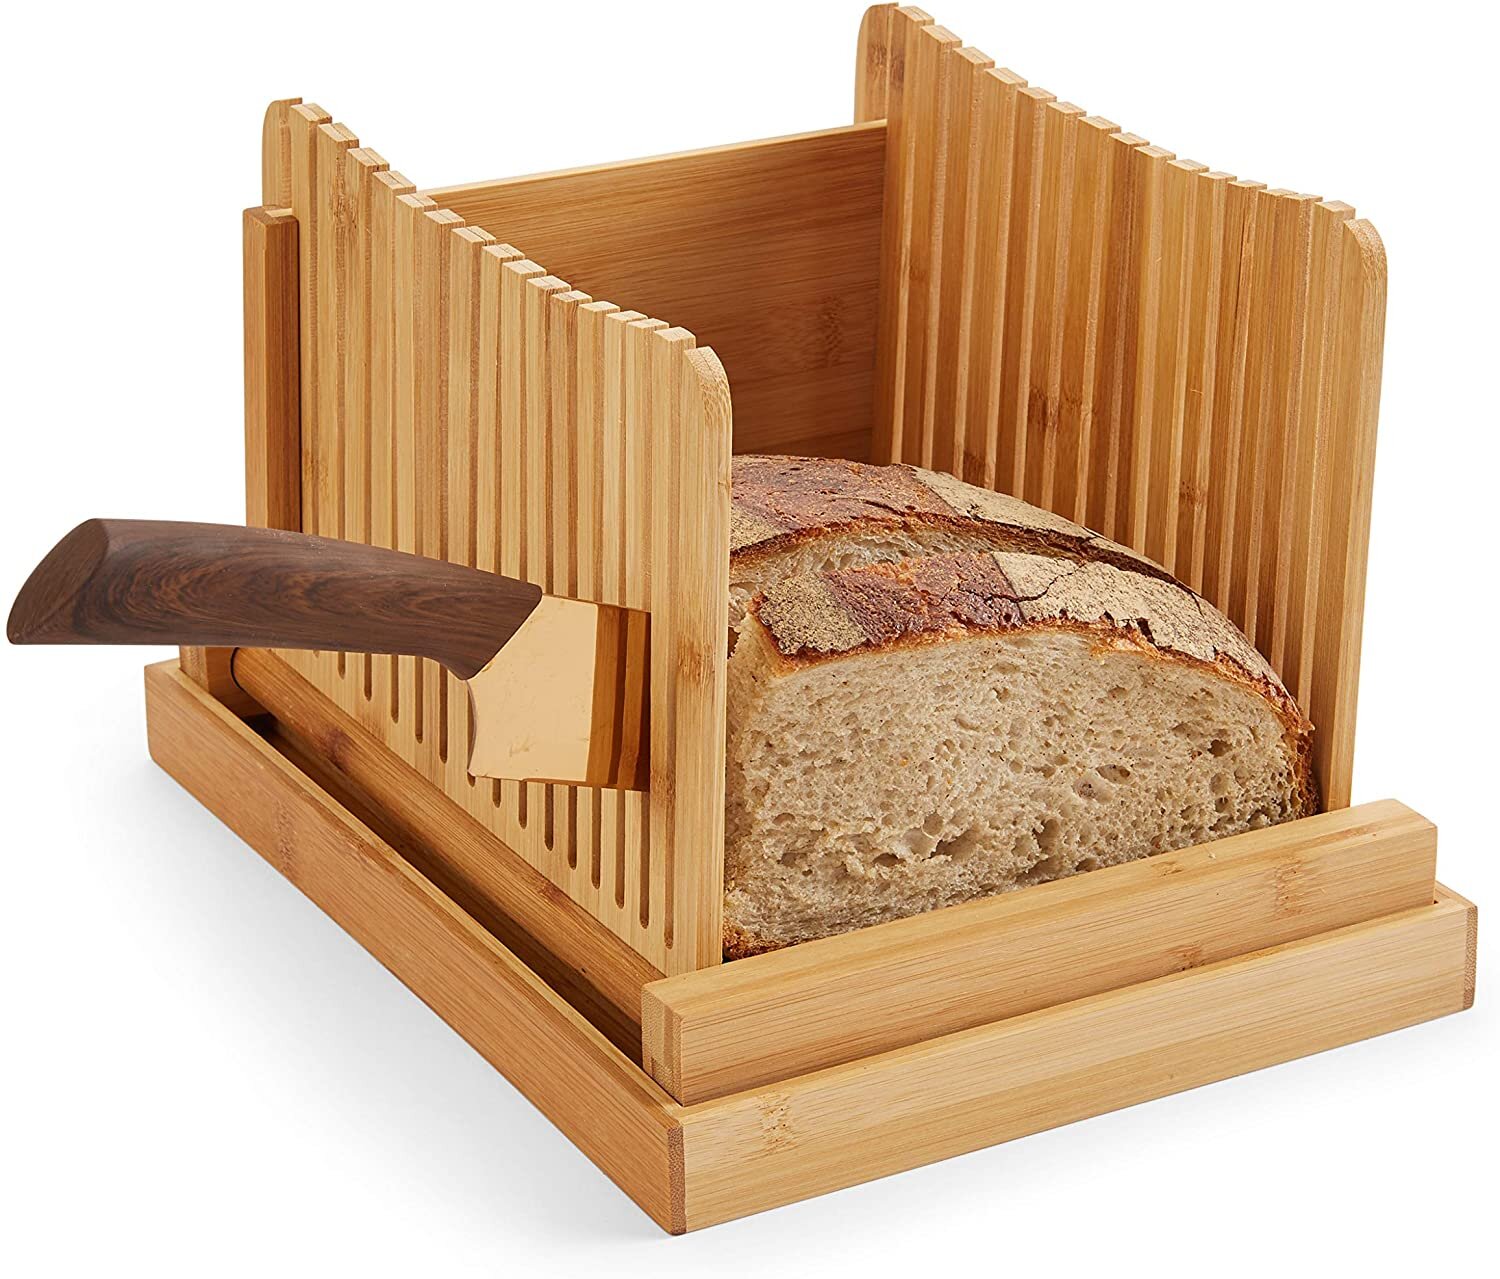 Dbtech Wood Bread Slicer for Homemade Bread, Compact & Foldable